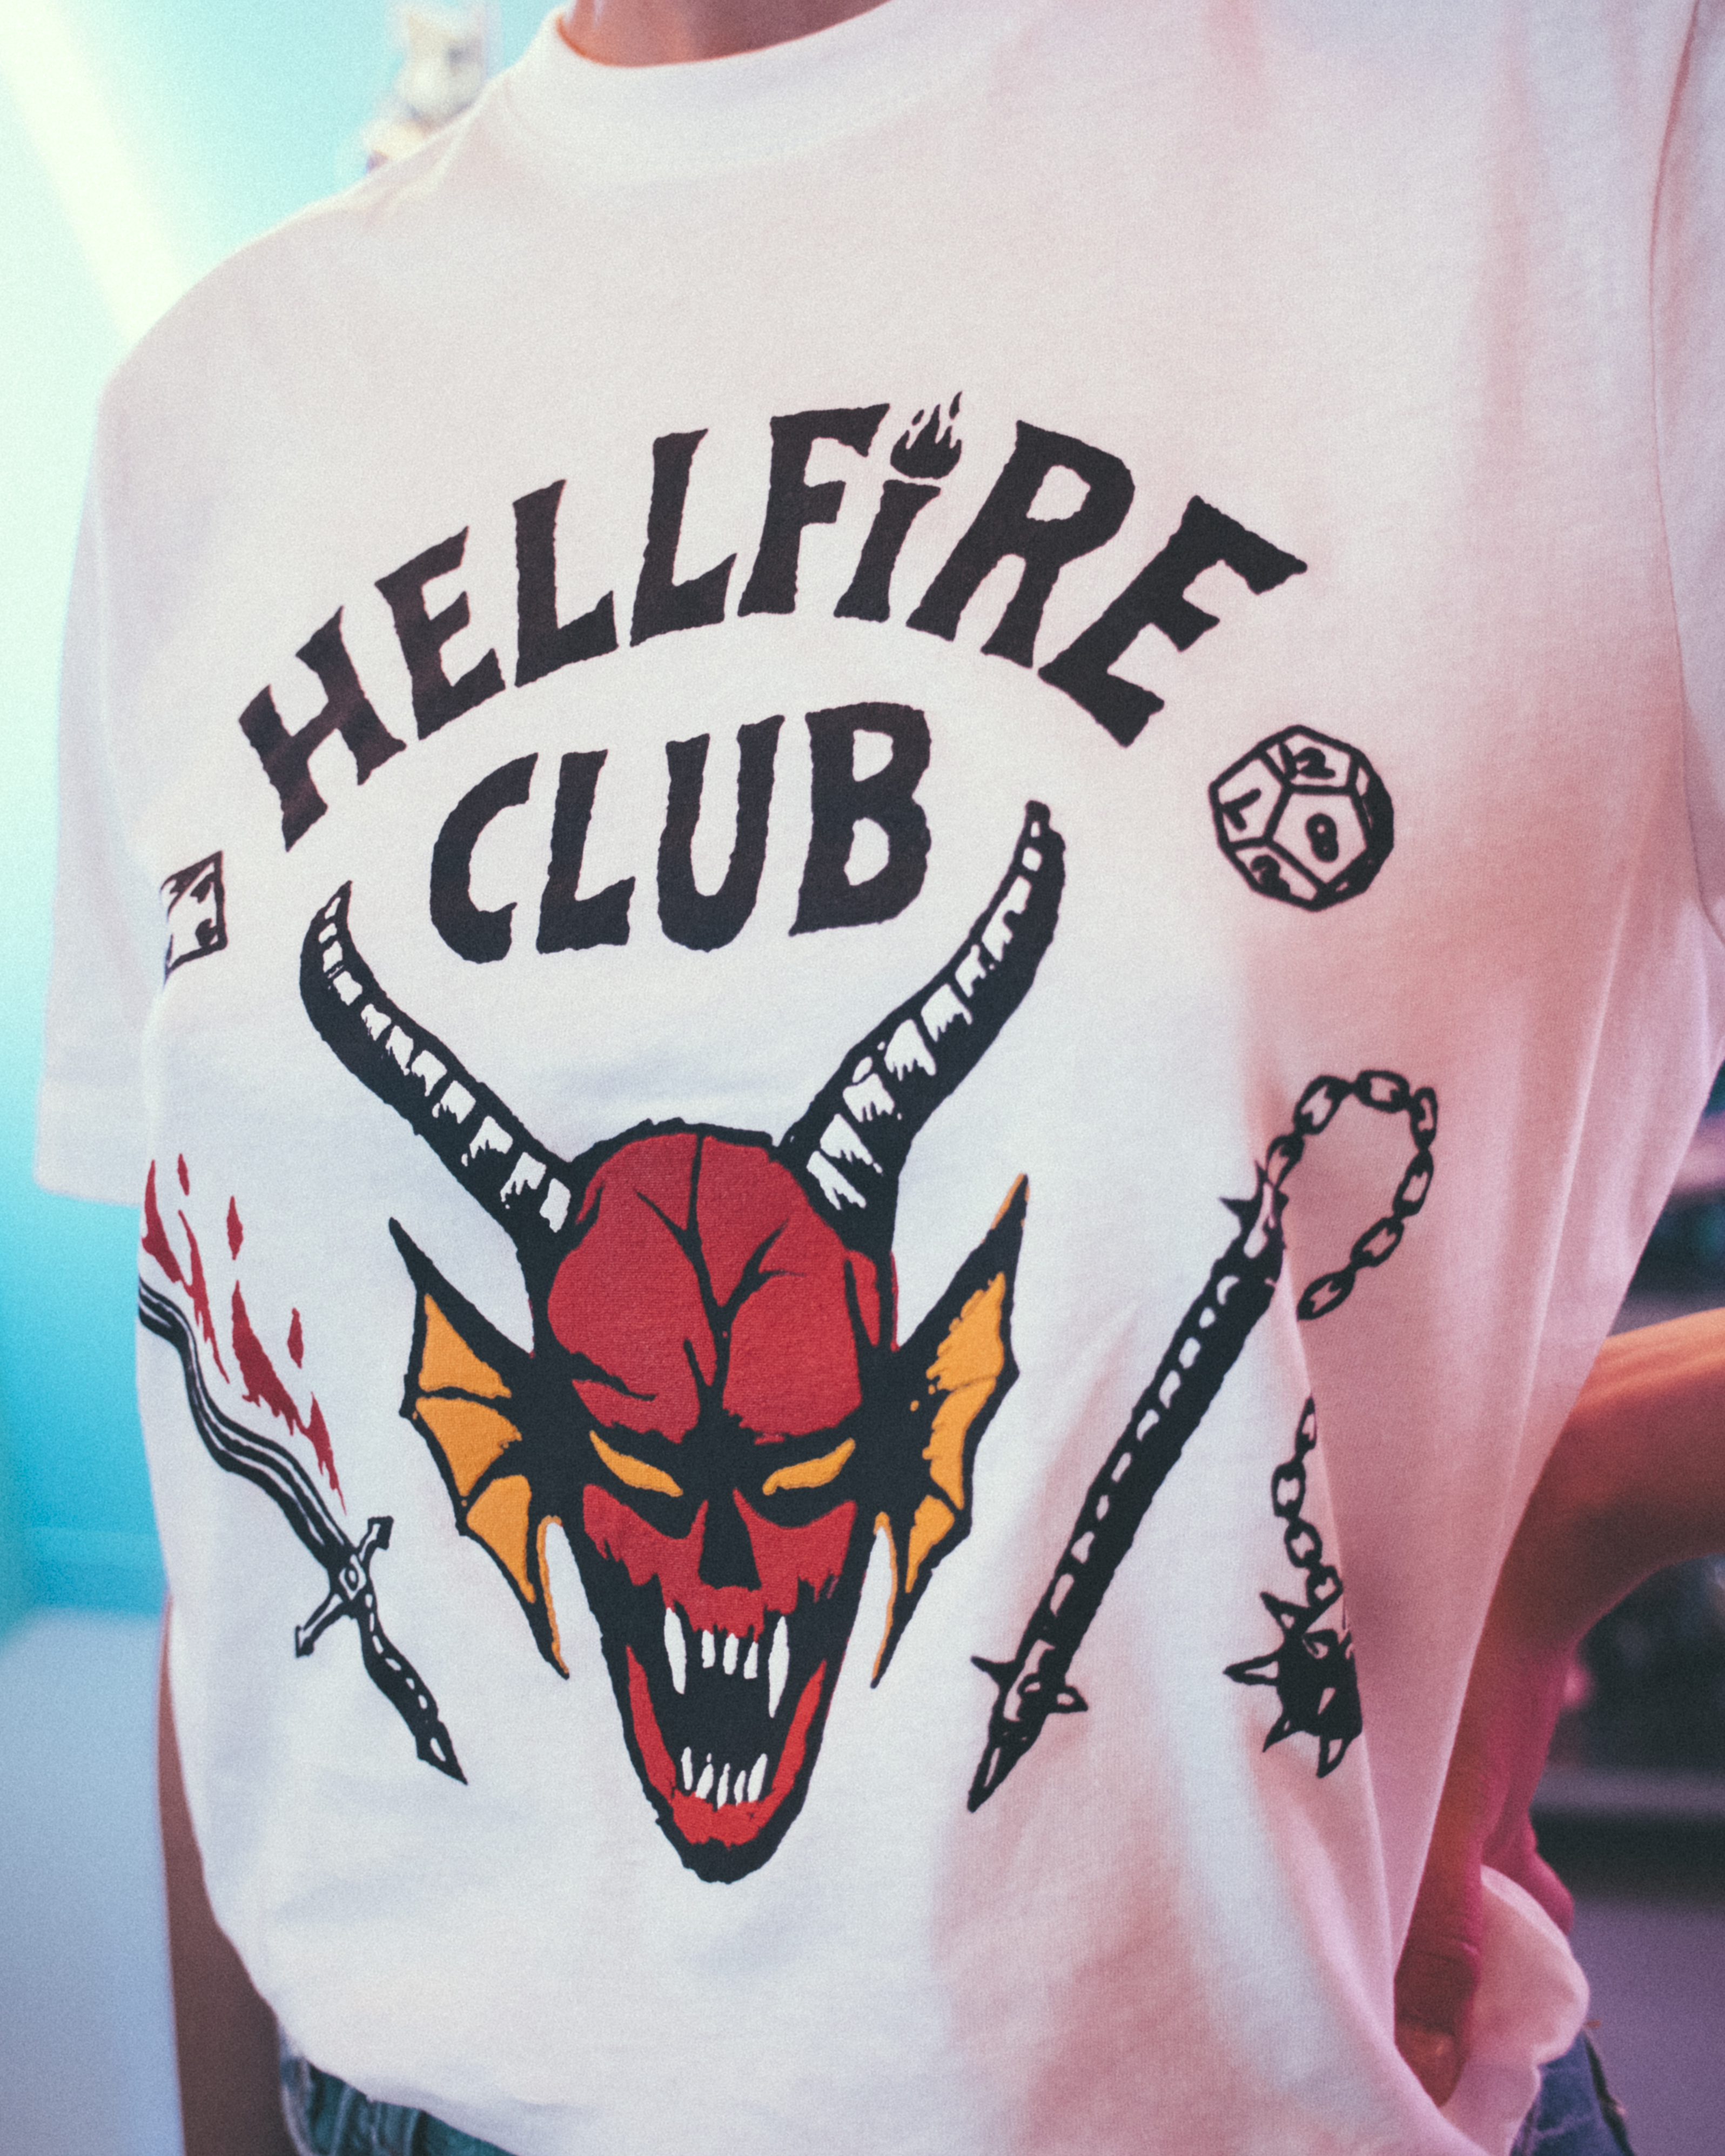 Føde mount ru Primark on Twitter: "Everyone stay calm. New Hellfire Club t-shirts have  arrived 👀 #StrangerThings4 #Primark #PrimarkXStrangerThings https://t.co/sVTl32i0BD"  / Twitter